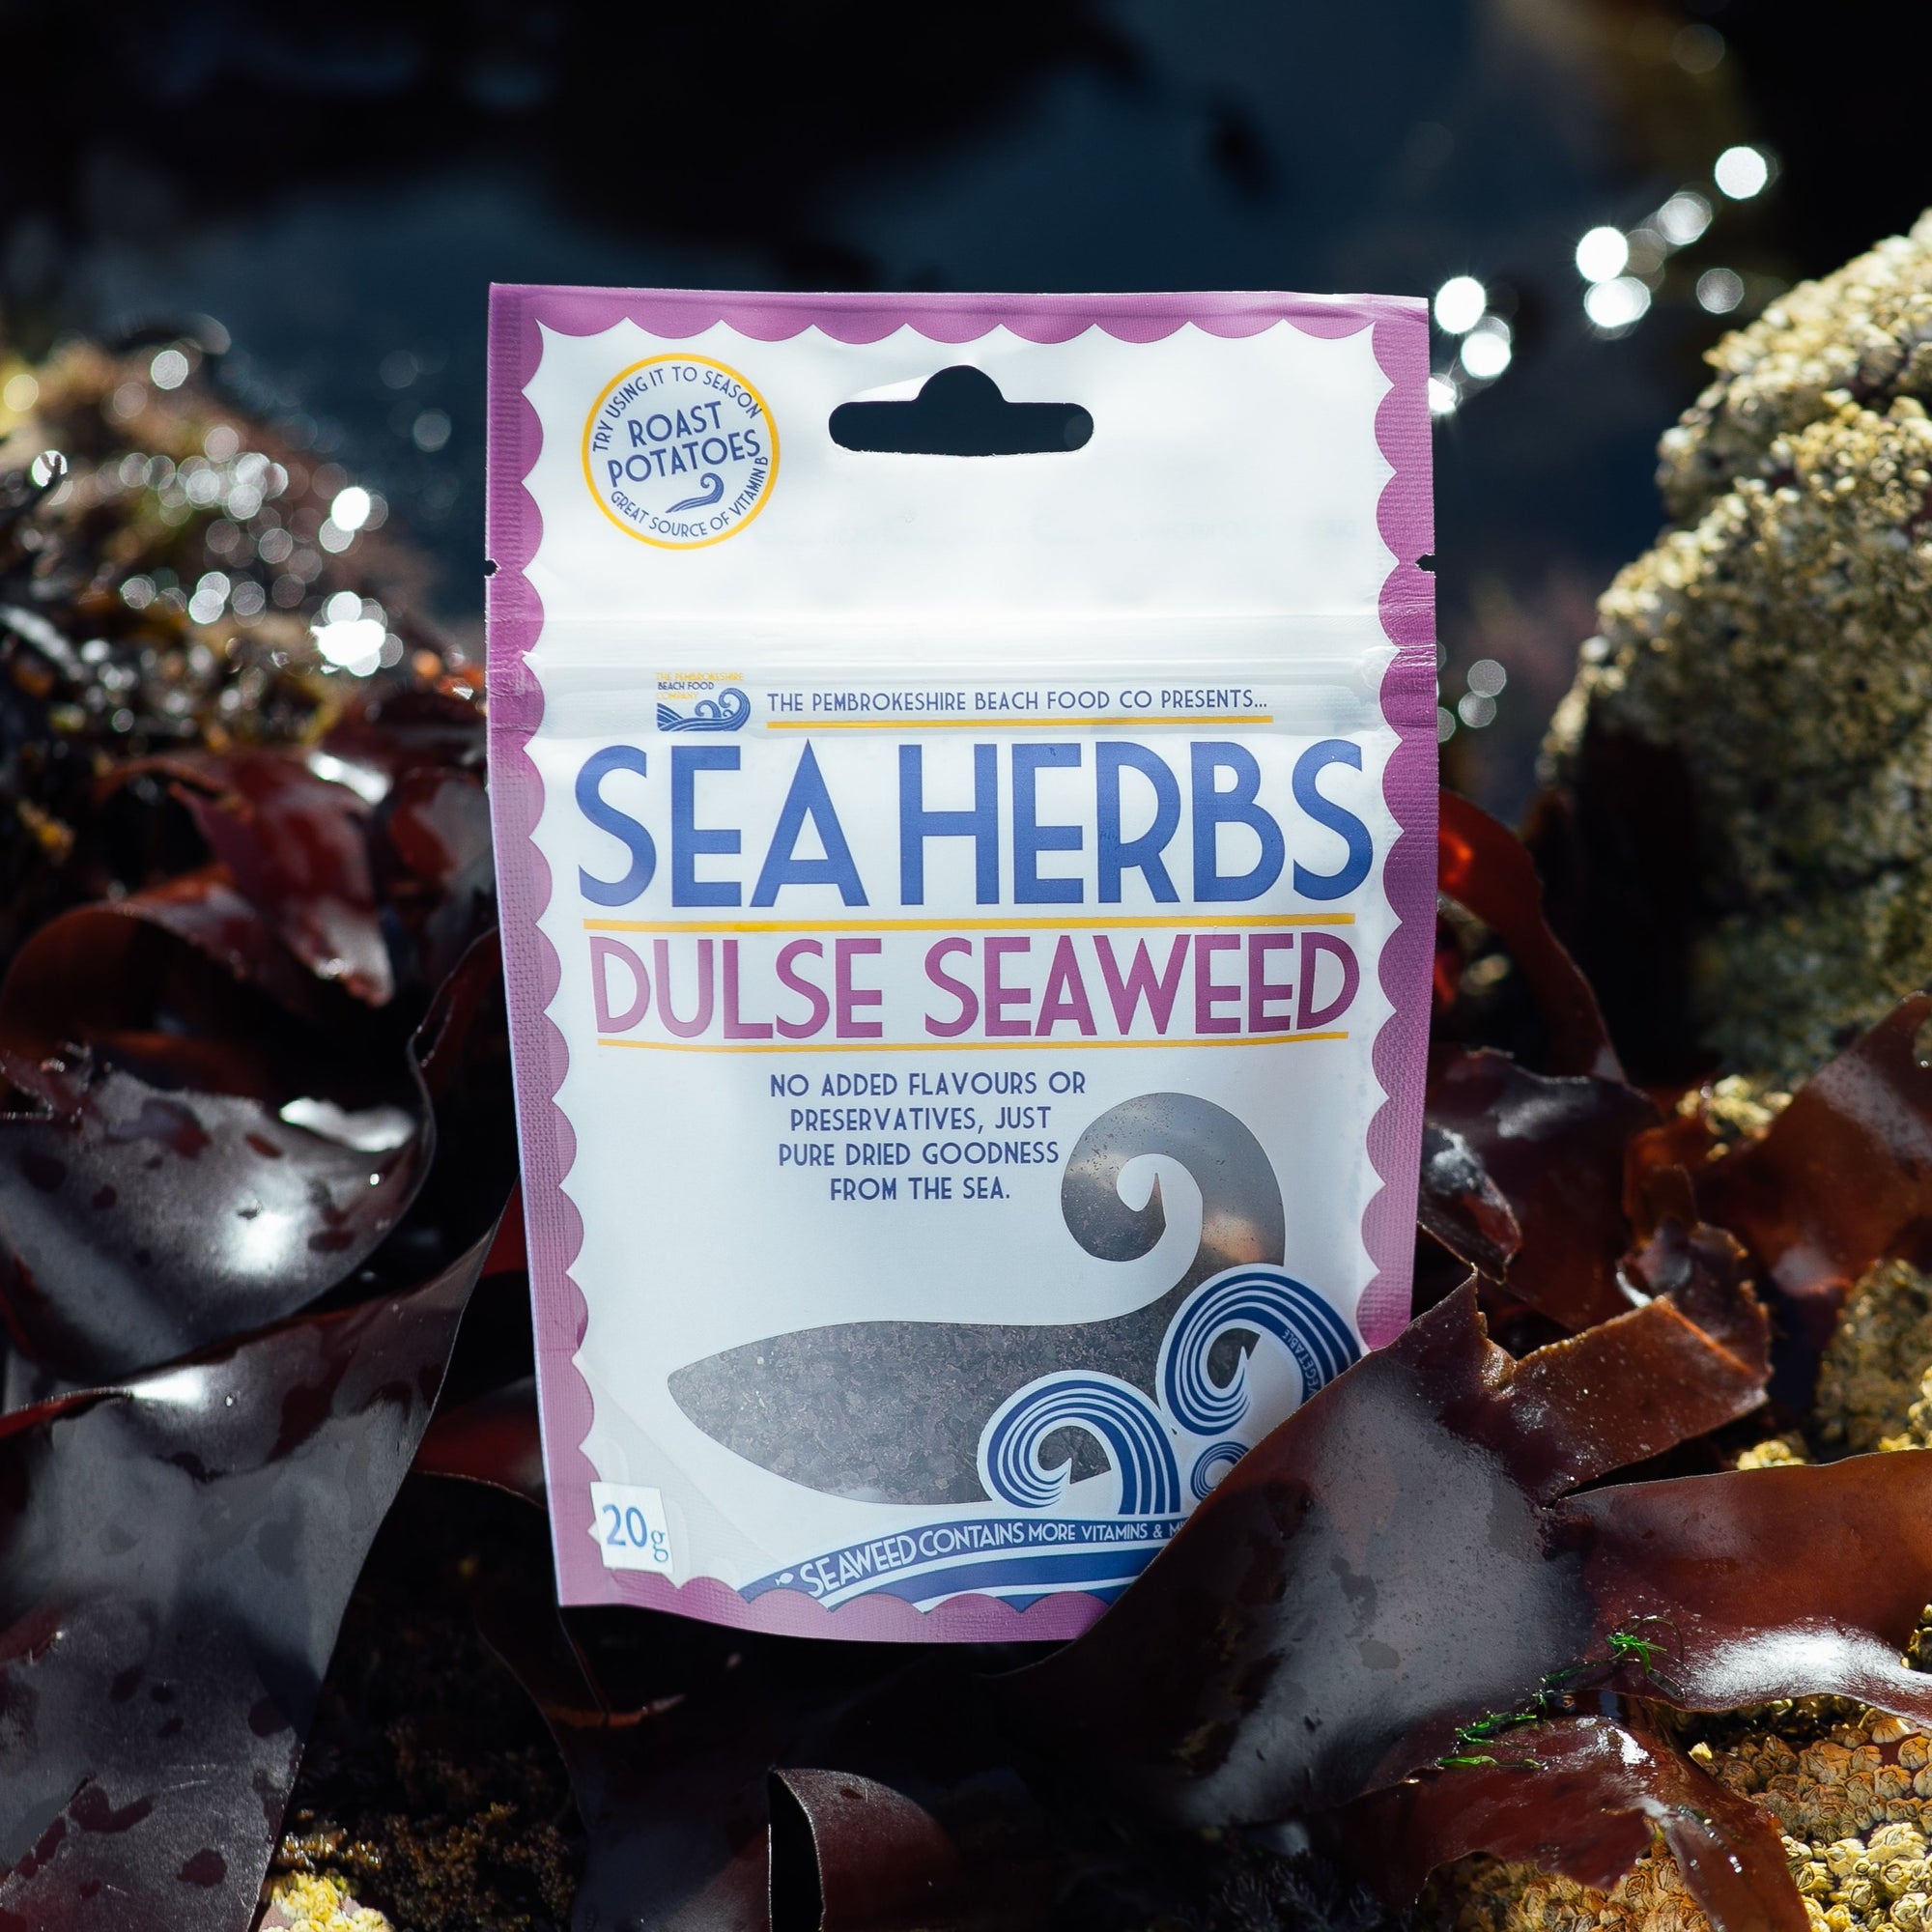 Dried Dulse Seaweed Pouch 